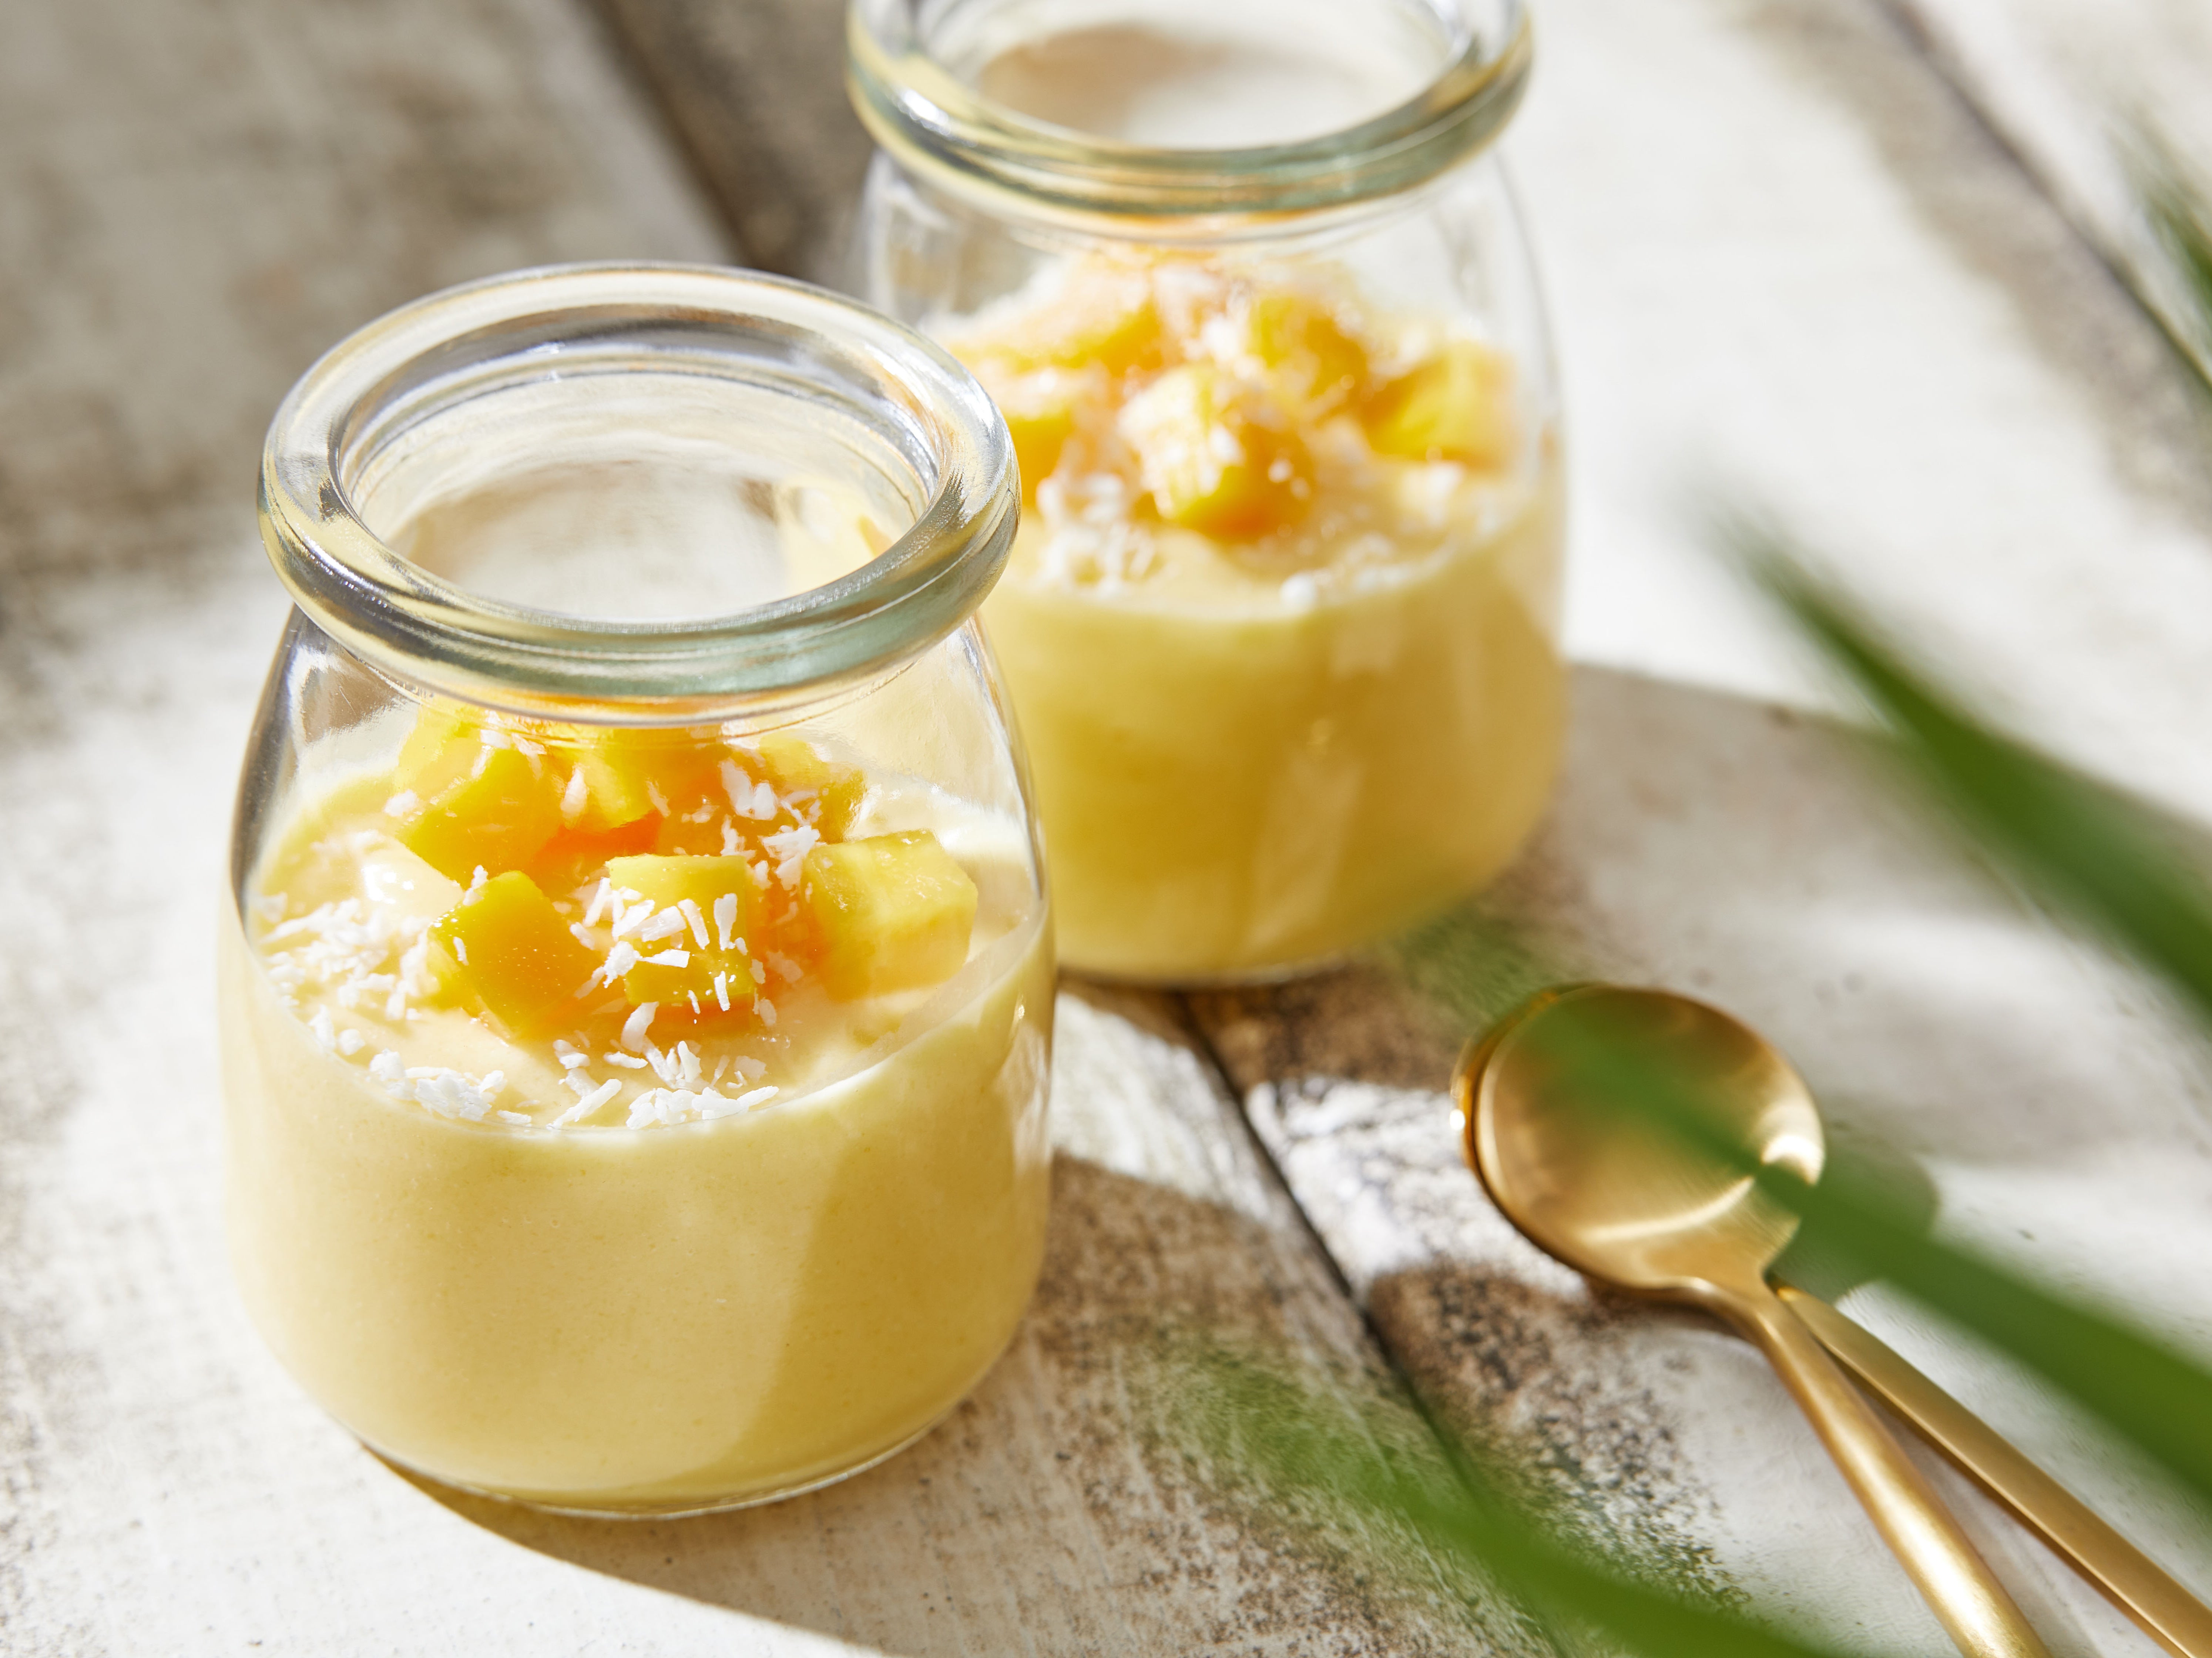 These no-cook dessert cups are a simple blend of mango and light coconut milk